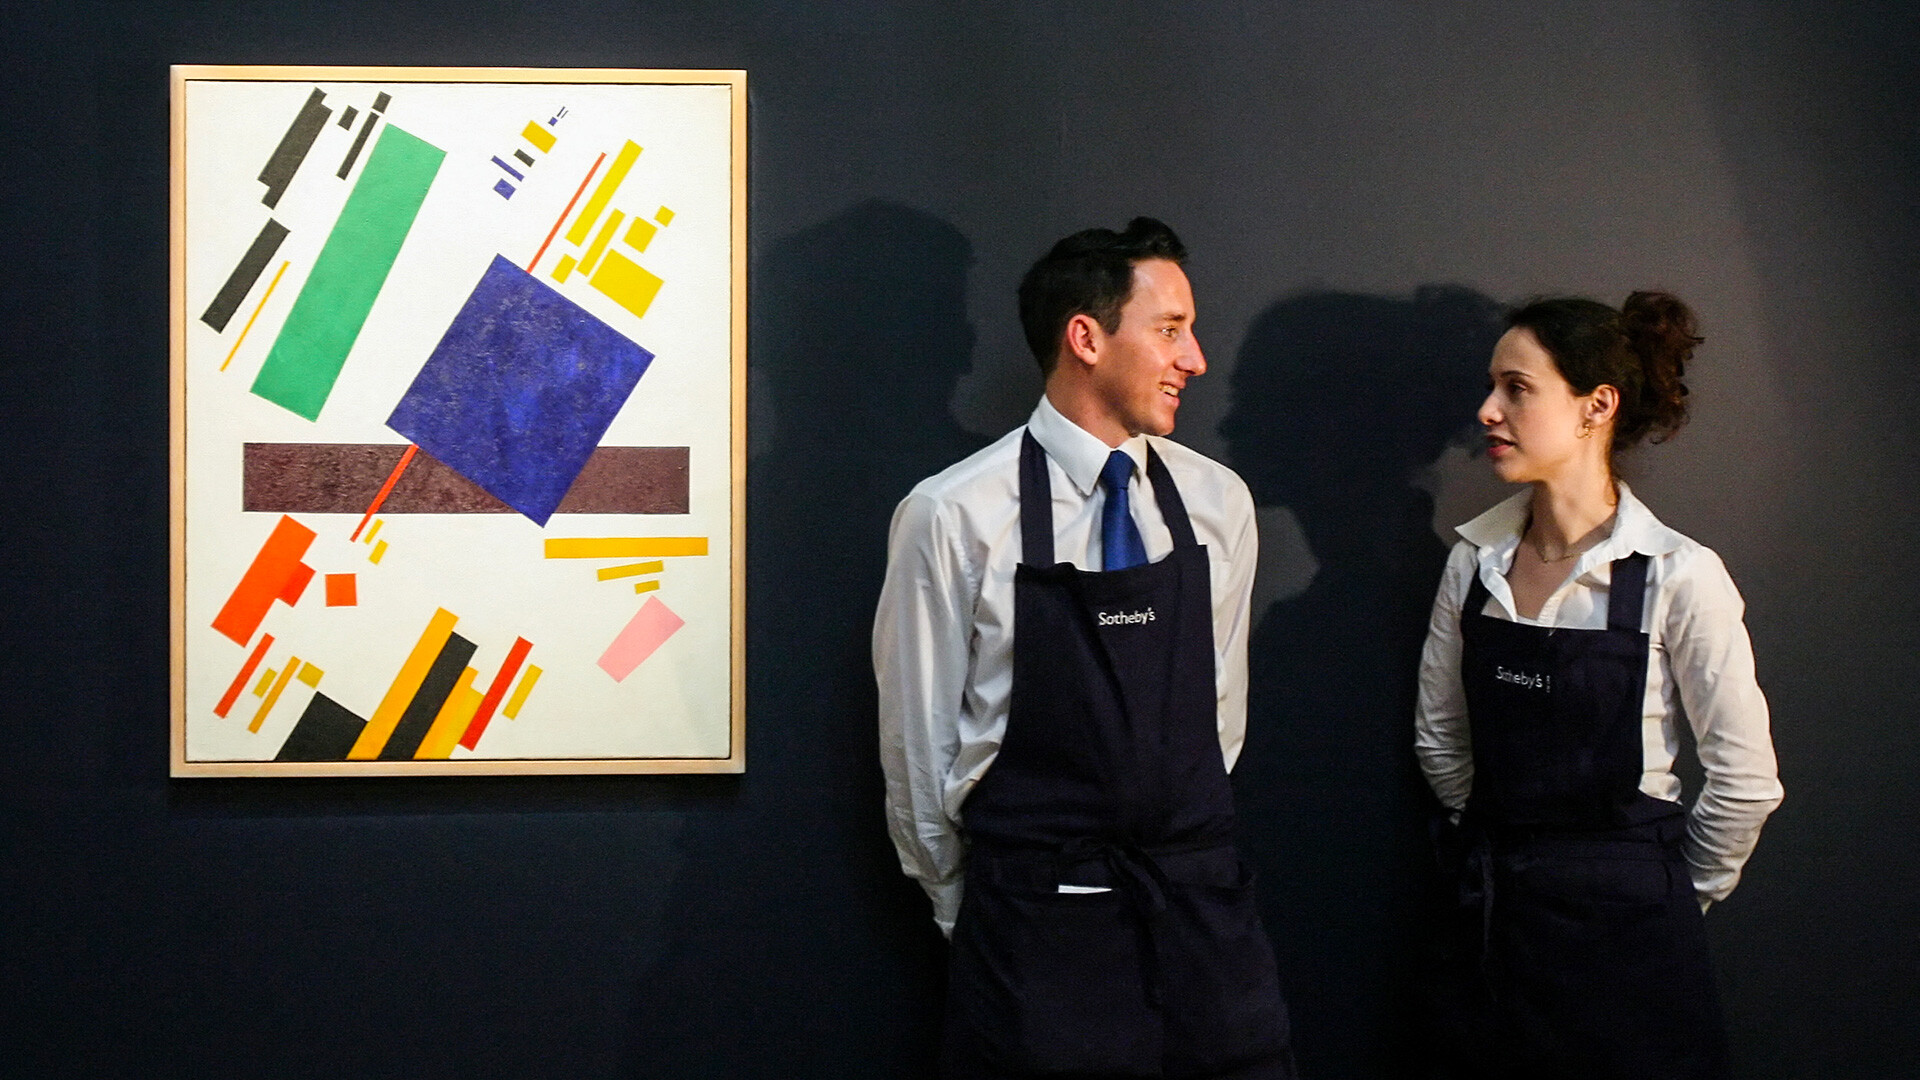 "Suprematist Composition" by Kazimir Malevich is displayed at the Sotheby's auction house in London, 2008